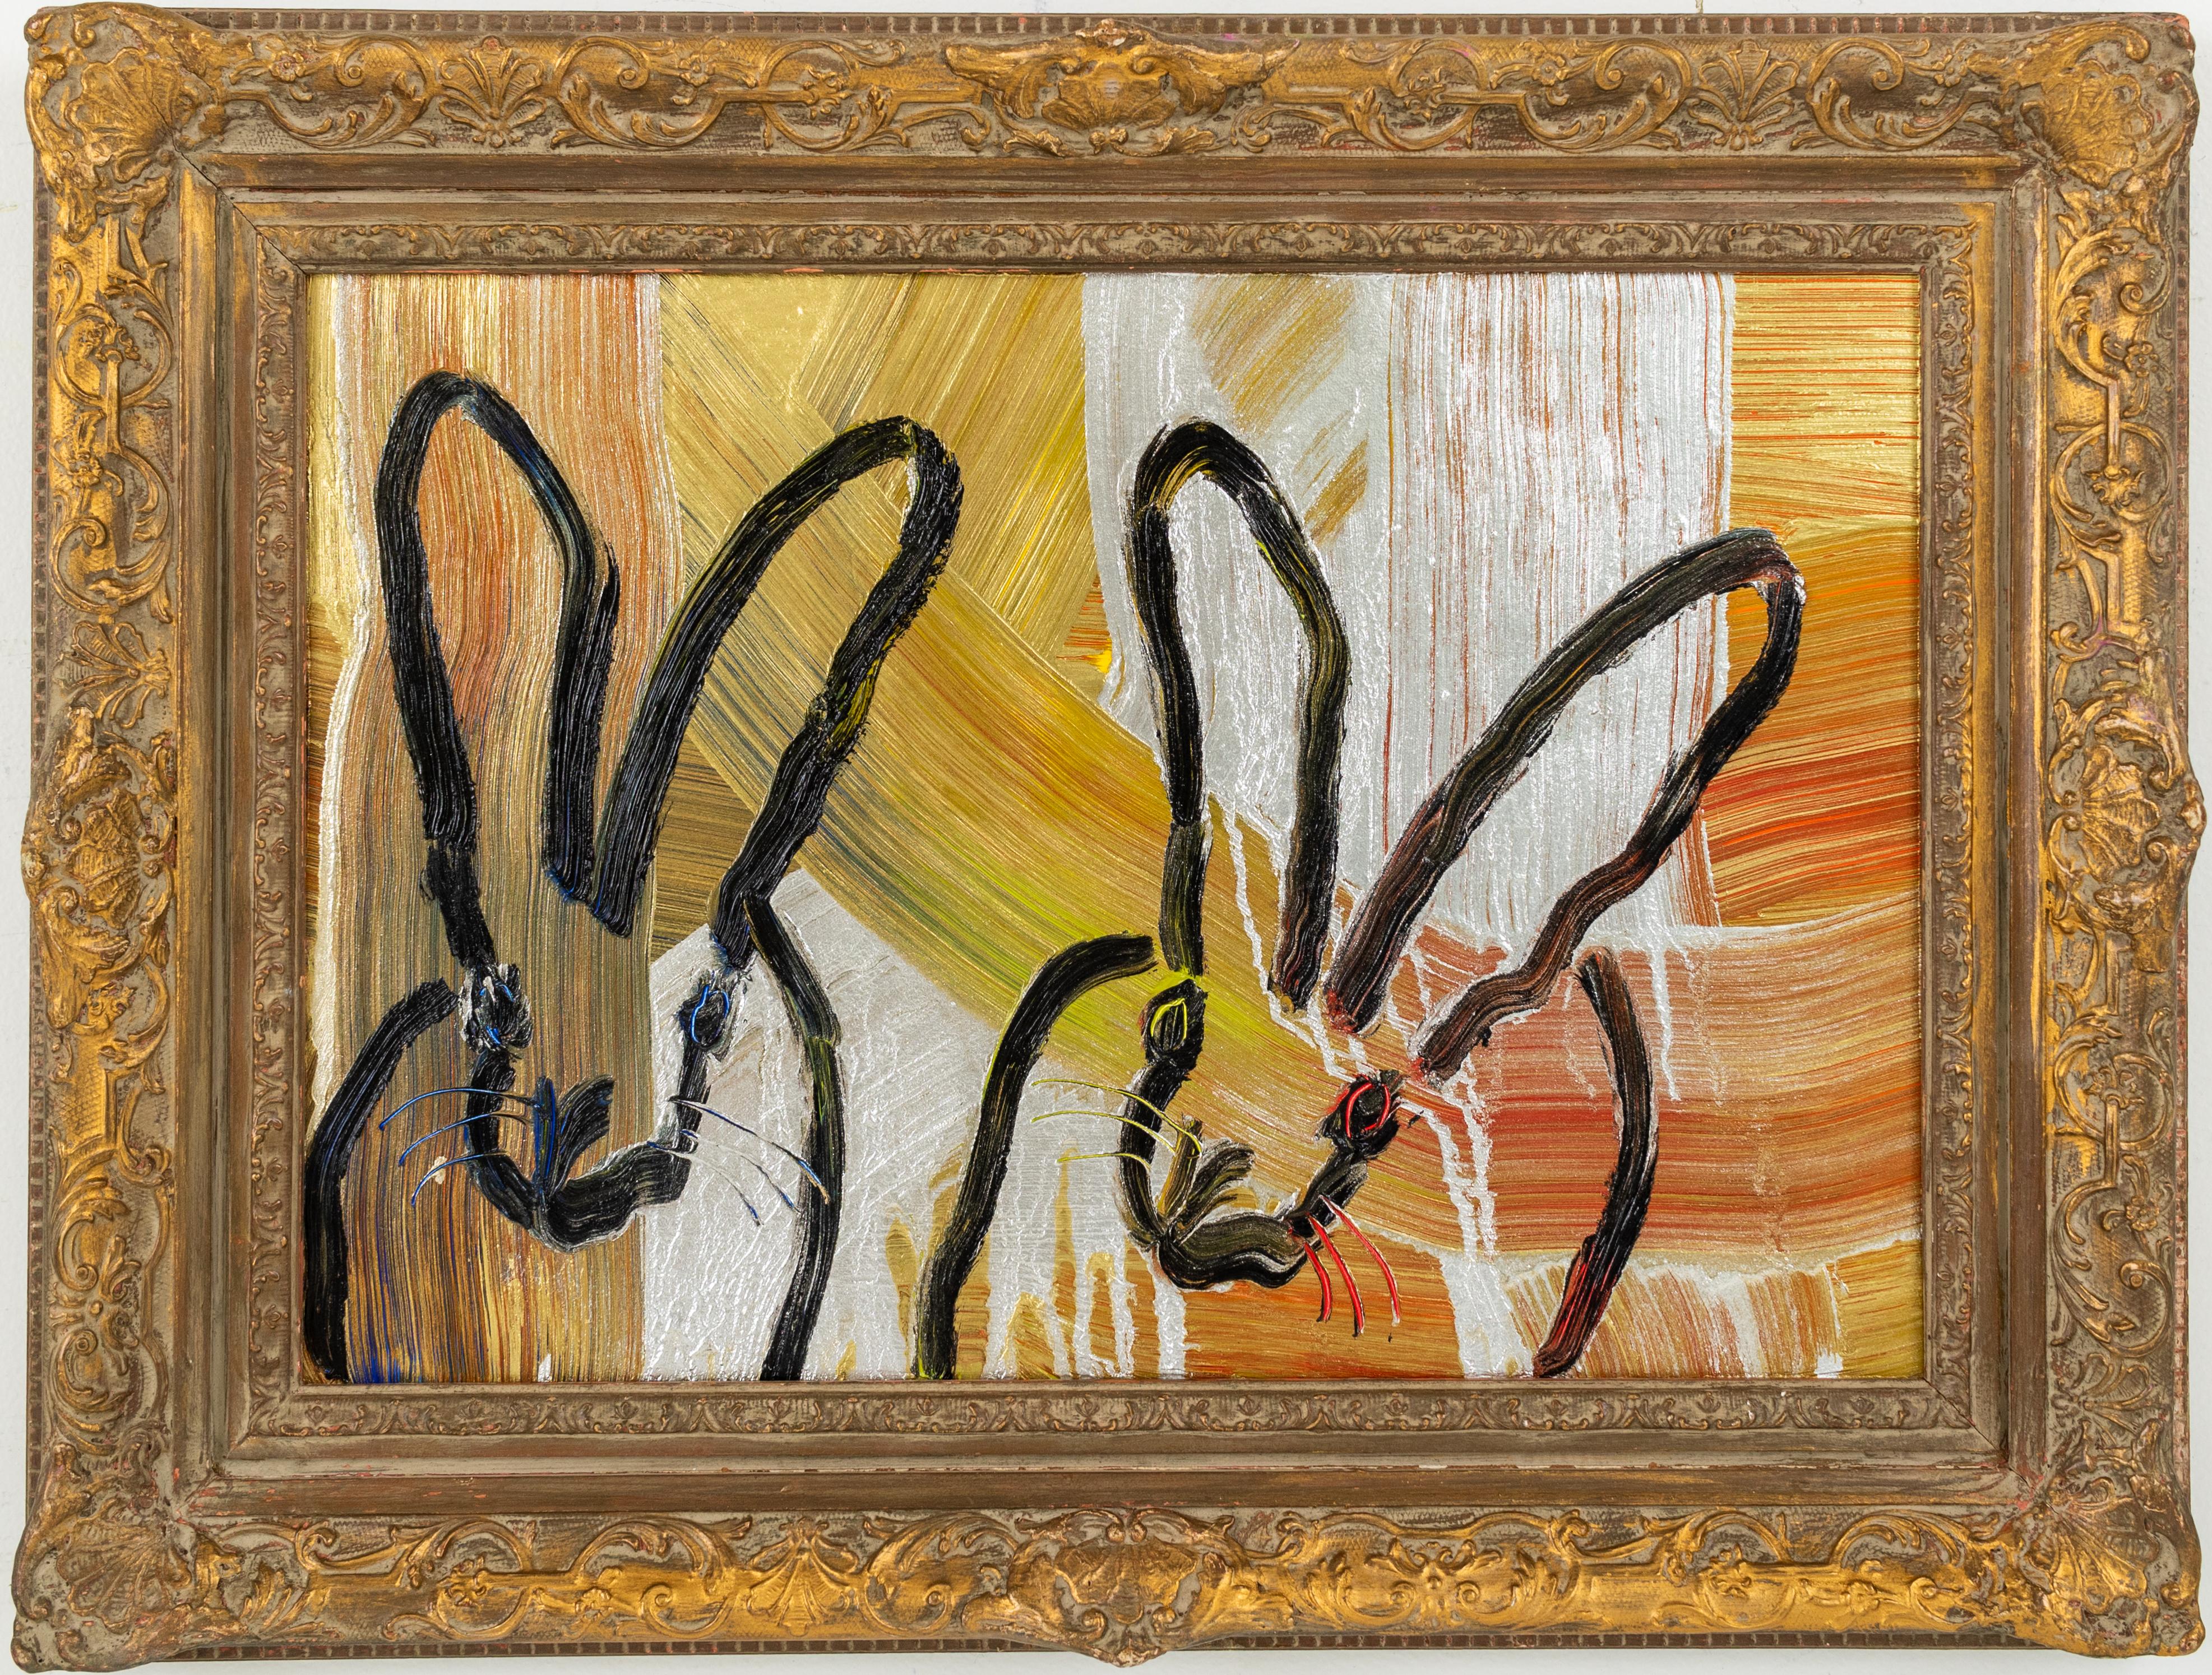 Hunt Slonem "Duo I" Metallic Multicolored Bunnies
Black outlined bunnies on a "totem" multicolored metallic background in an antique gold frame

Unframed: 16 x 23 inches  
Framed: 22.5 x 29.5 inches
*Painting is framed - Please note that not all